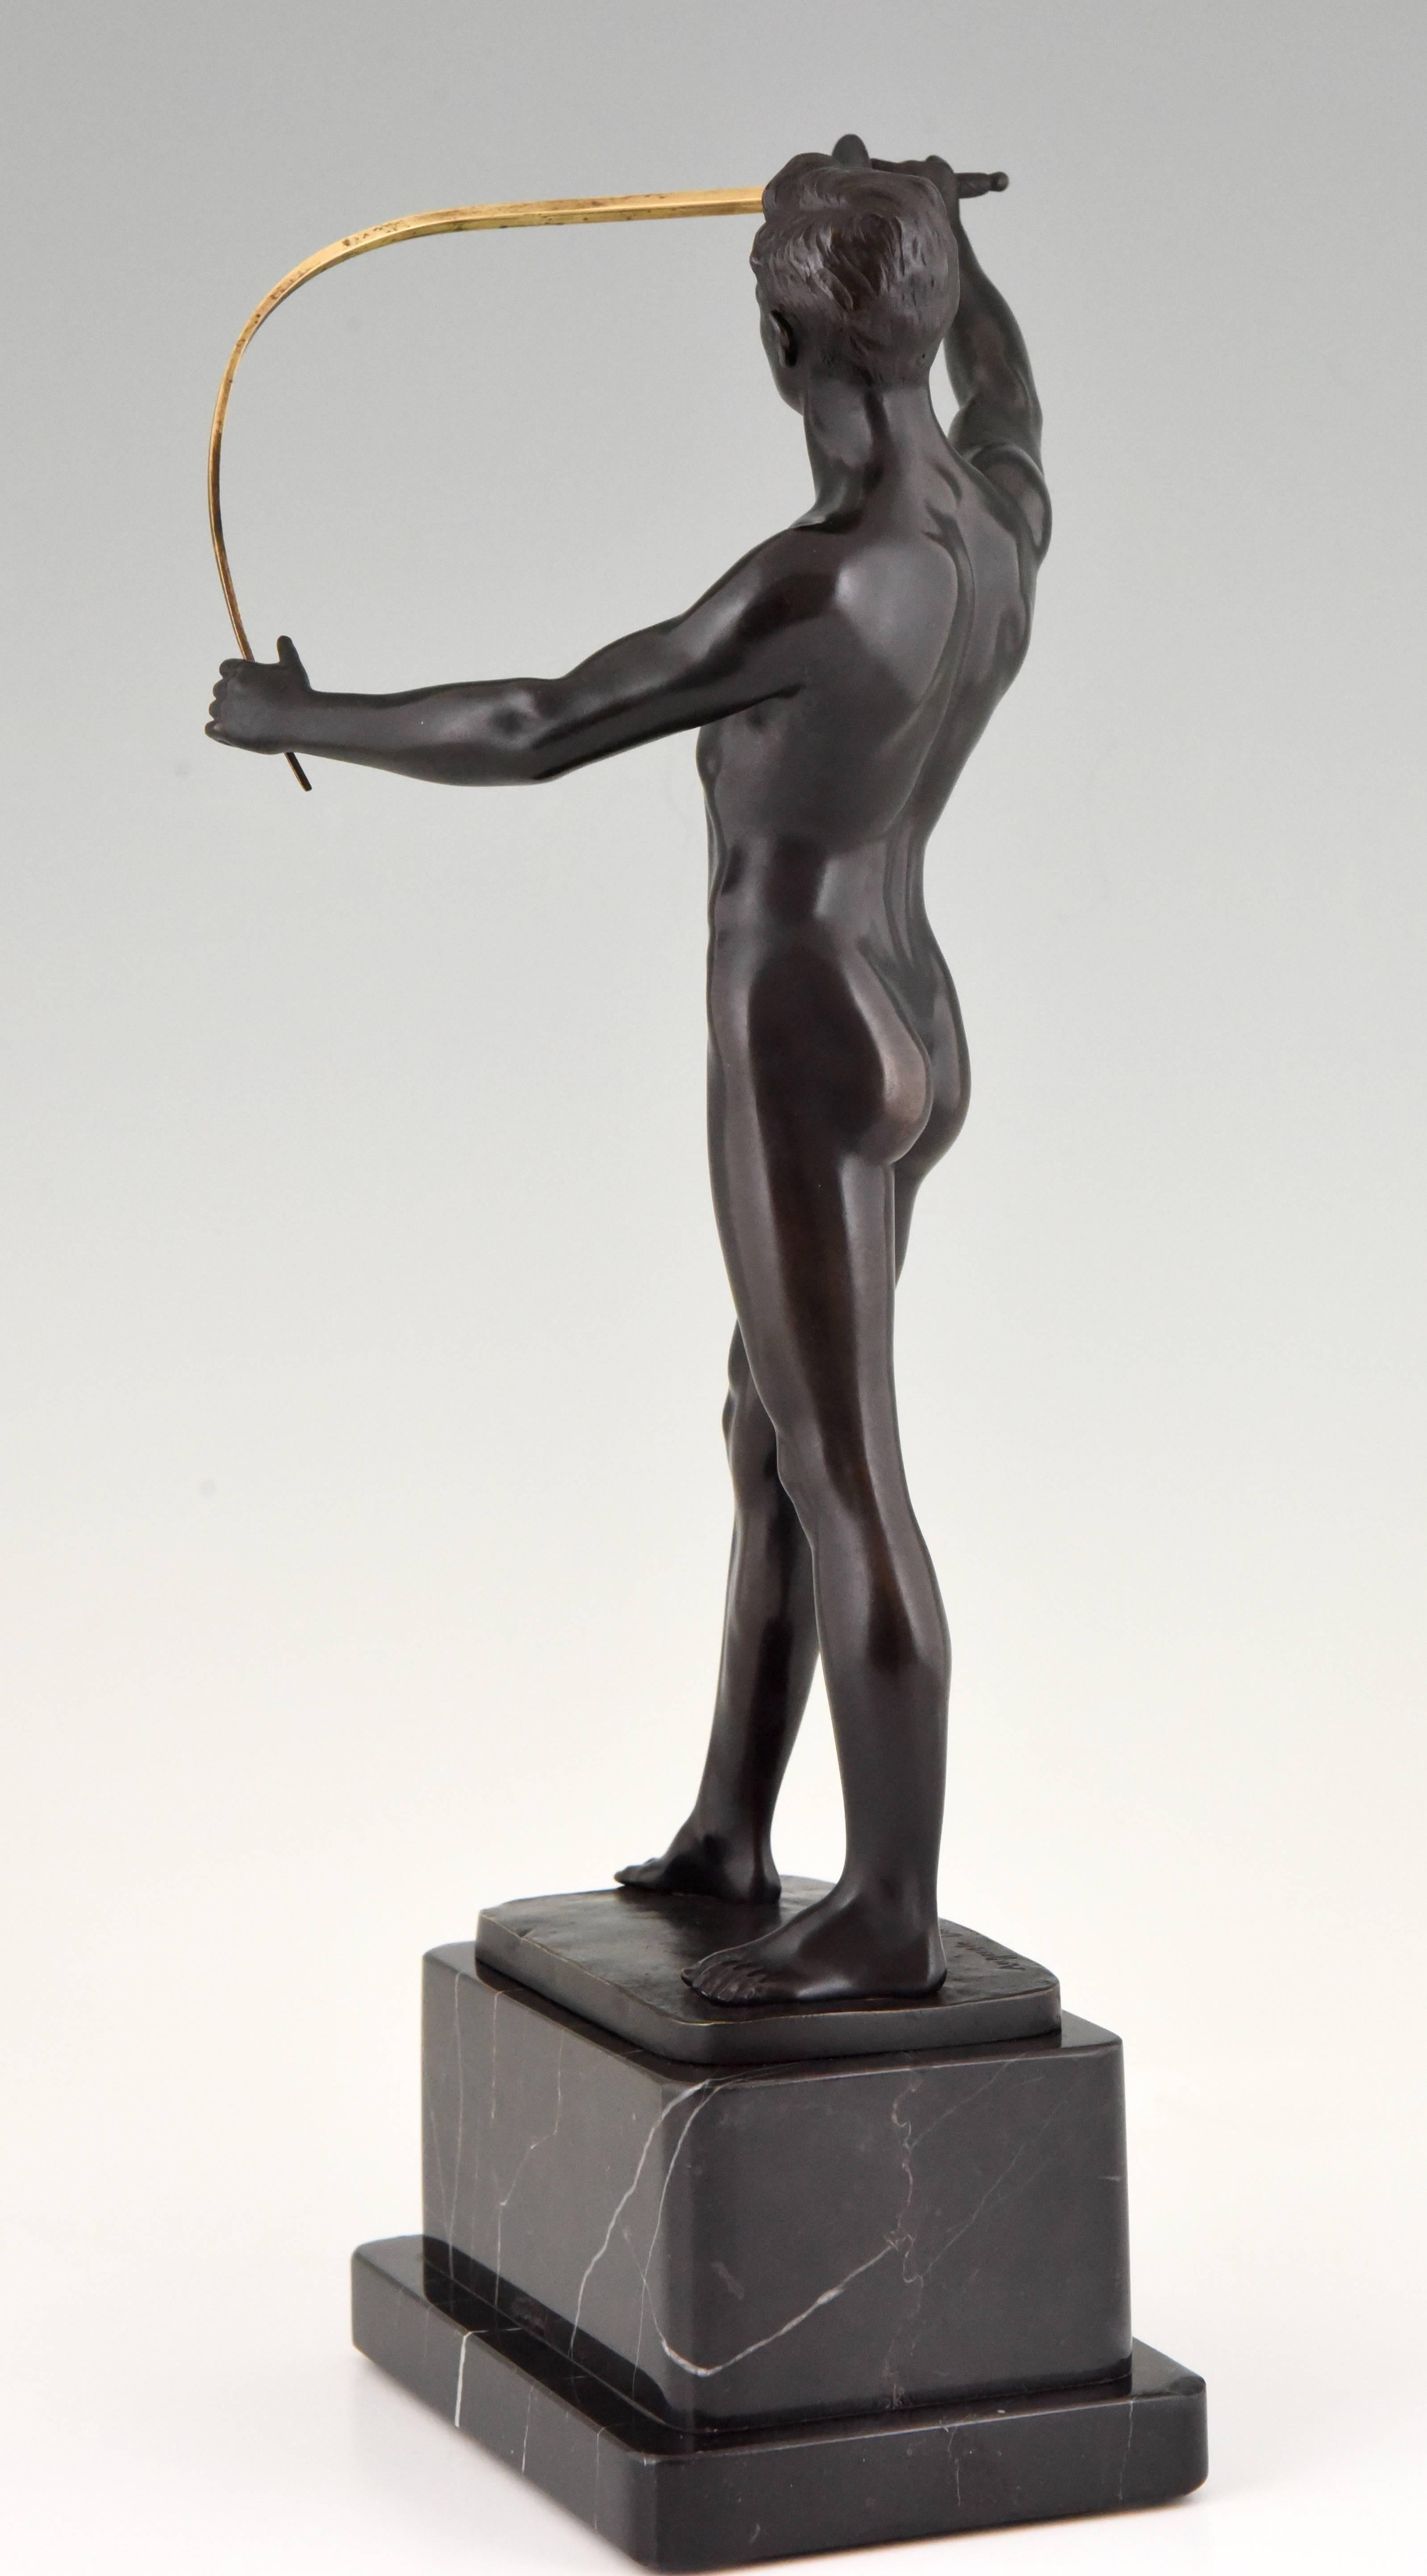 20th Century Art Deco Bronze Sculpture of a male nude Fencer by Auguste Durin, 1920